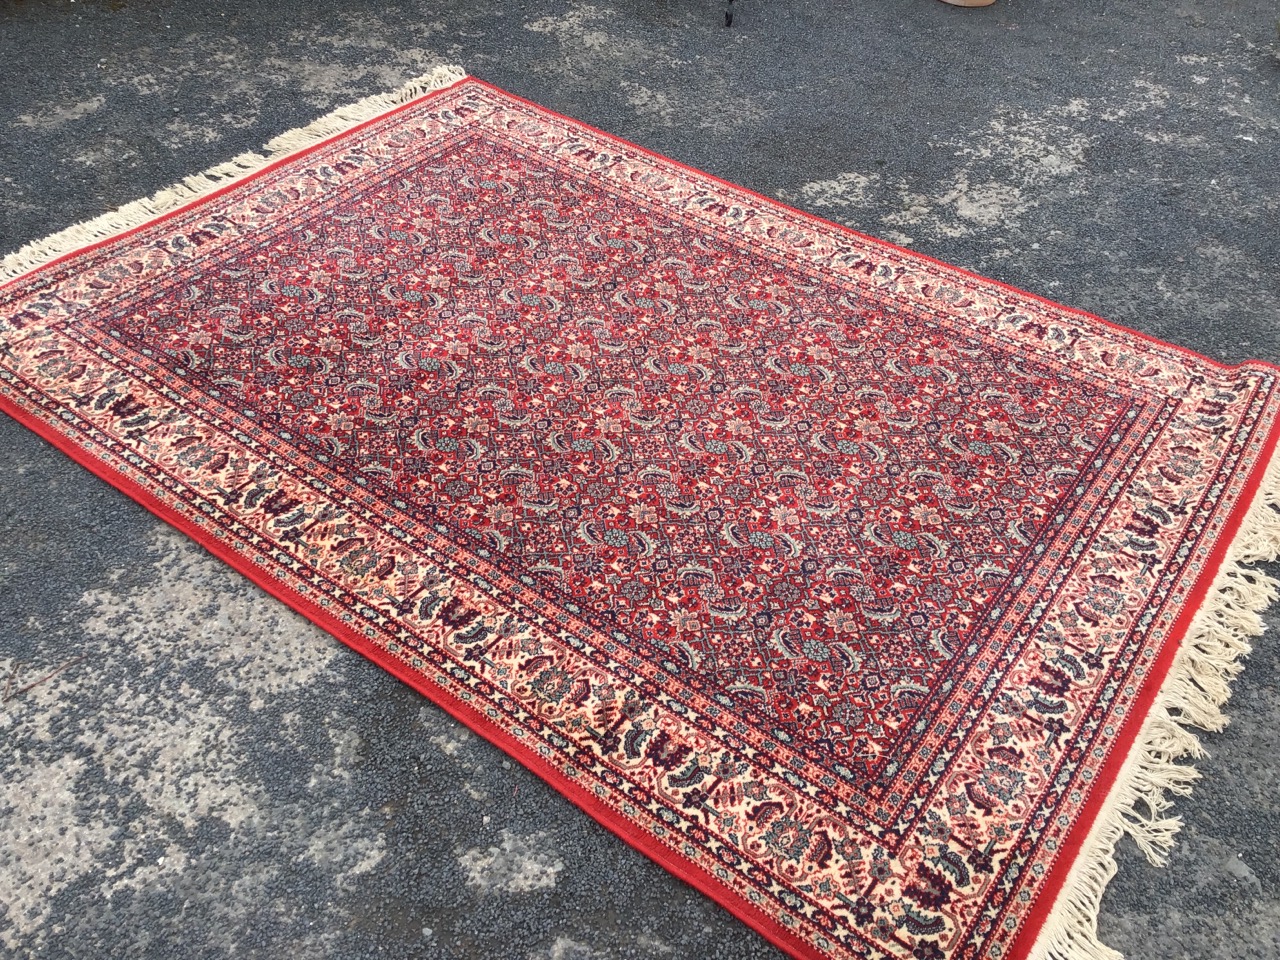 A Persian rug woven with field of busy paisley type floral decoration on red ground, within a frieze - Image 3 of 3